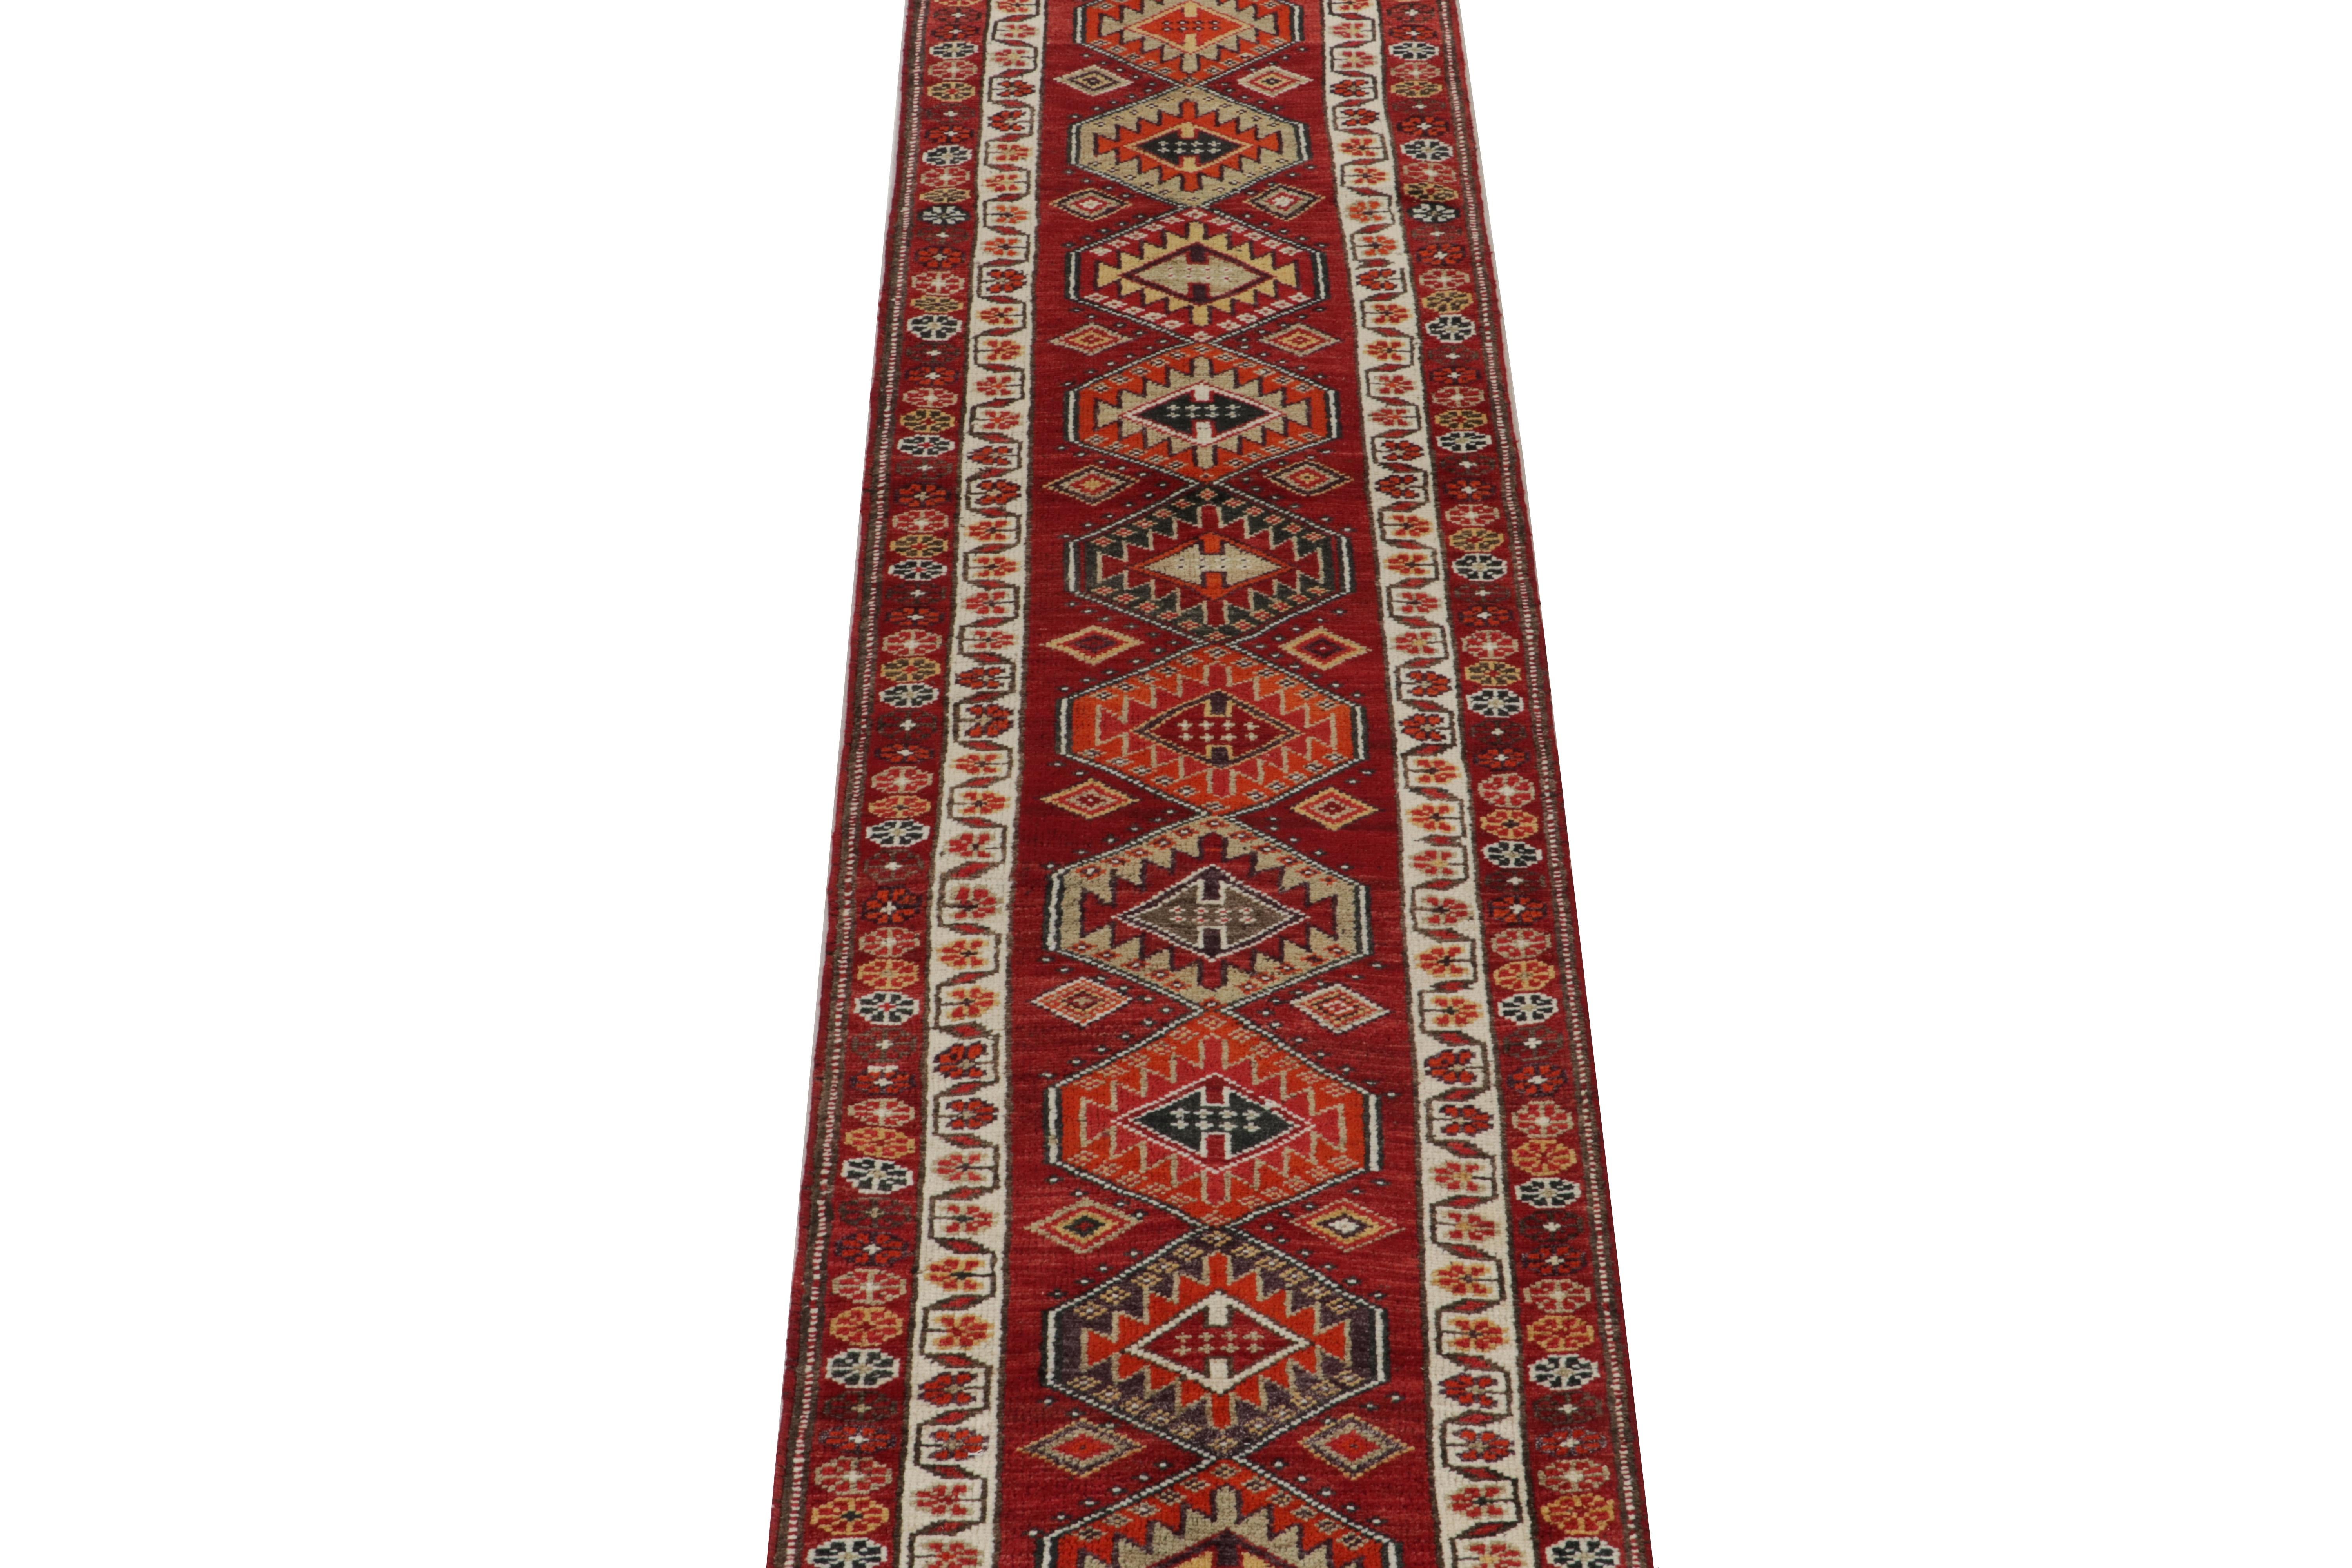 Hand-knotted in wool, a stupendous 3x13 vintage runner from Rug & Kilim’s latest curation of rare tribal rugs. Originating from Turkey circa 1950-1960, a piece as rare in size as it is rich in colorway and meticulous detail. 

The design enjoys a